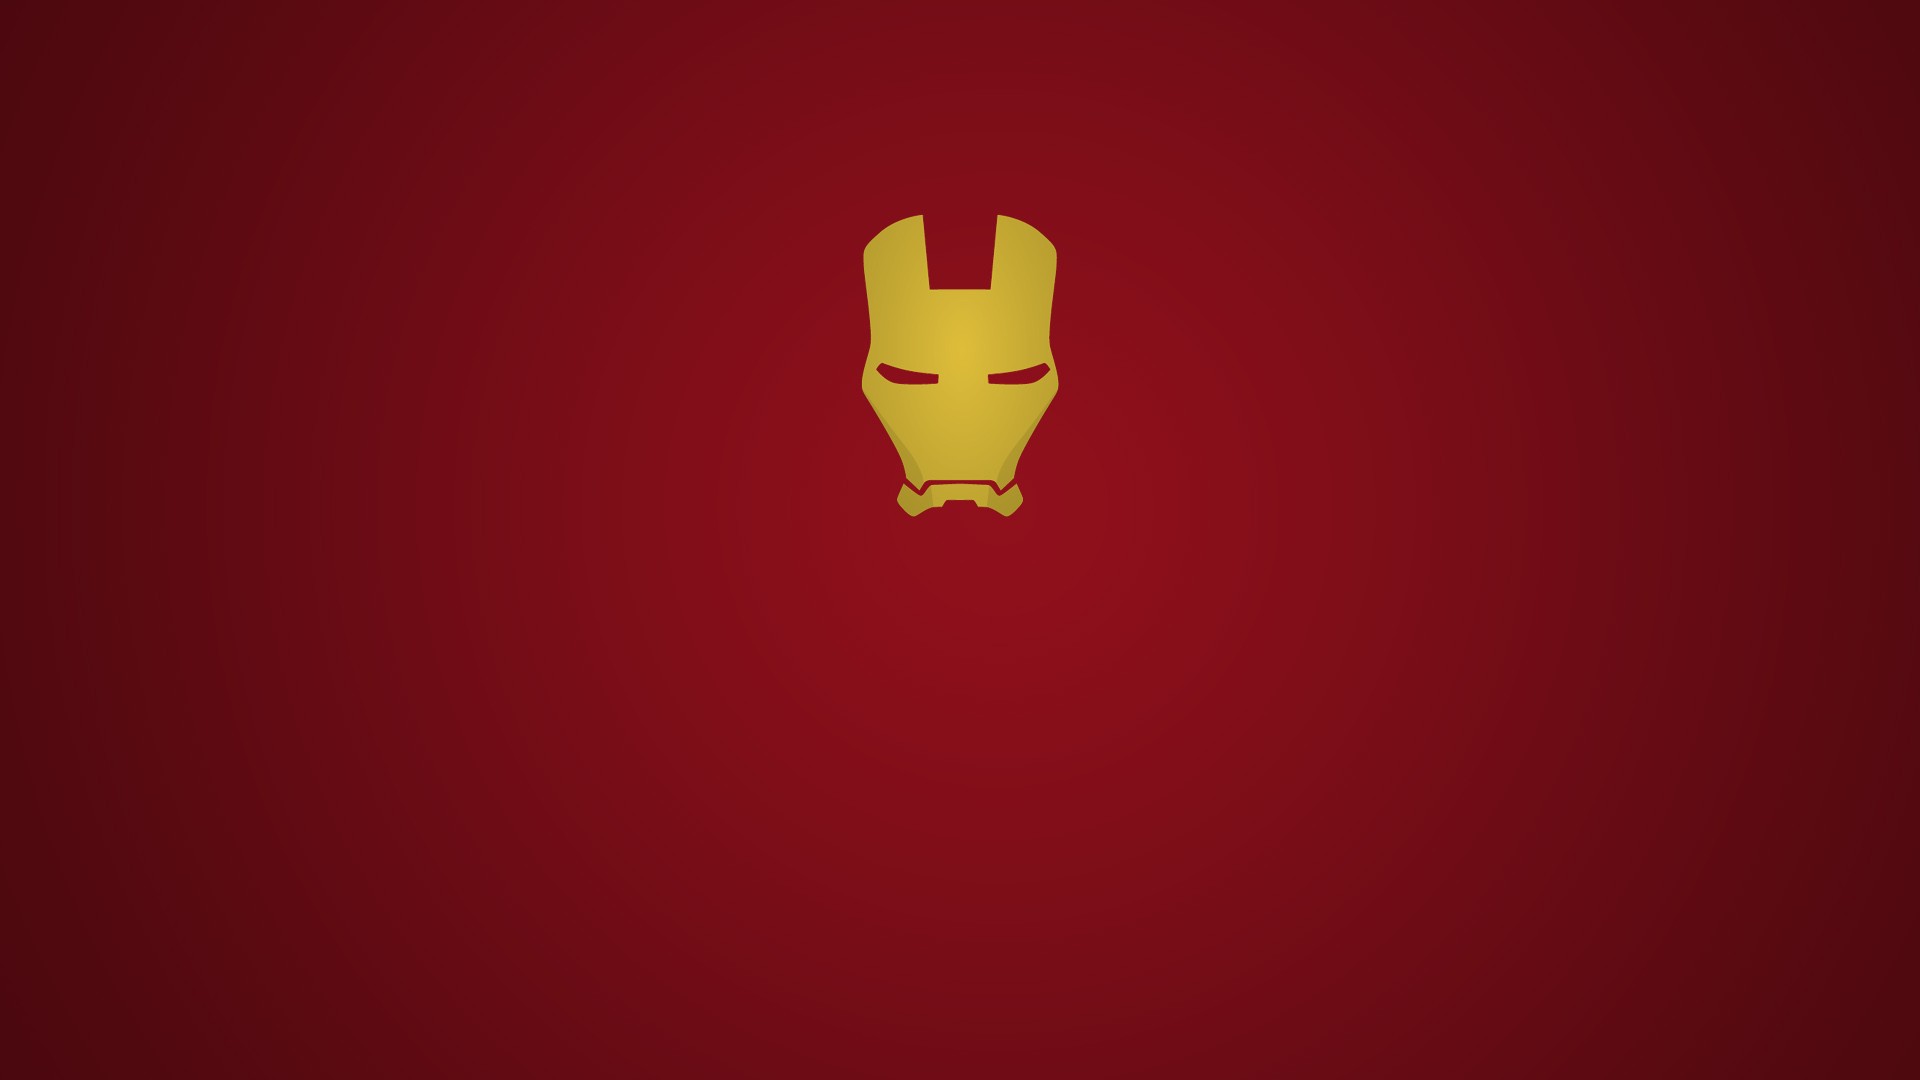 Iron Man Simple 2 HD Artist 4k Wallpapers Images Backgrounds